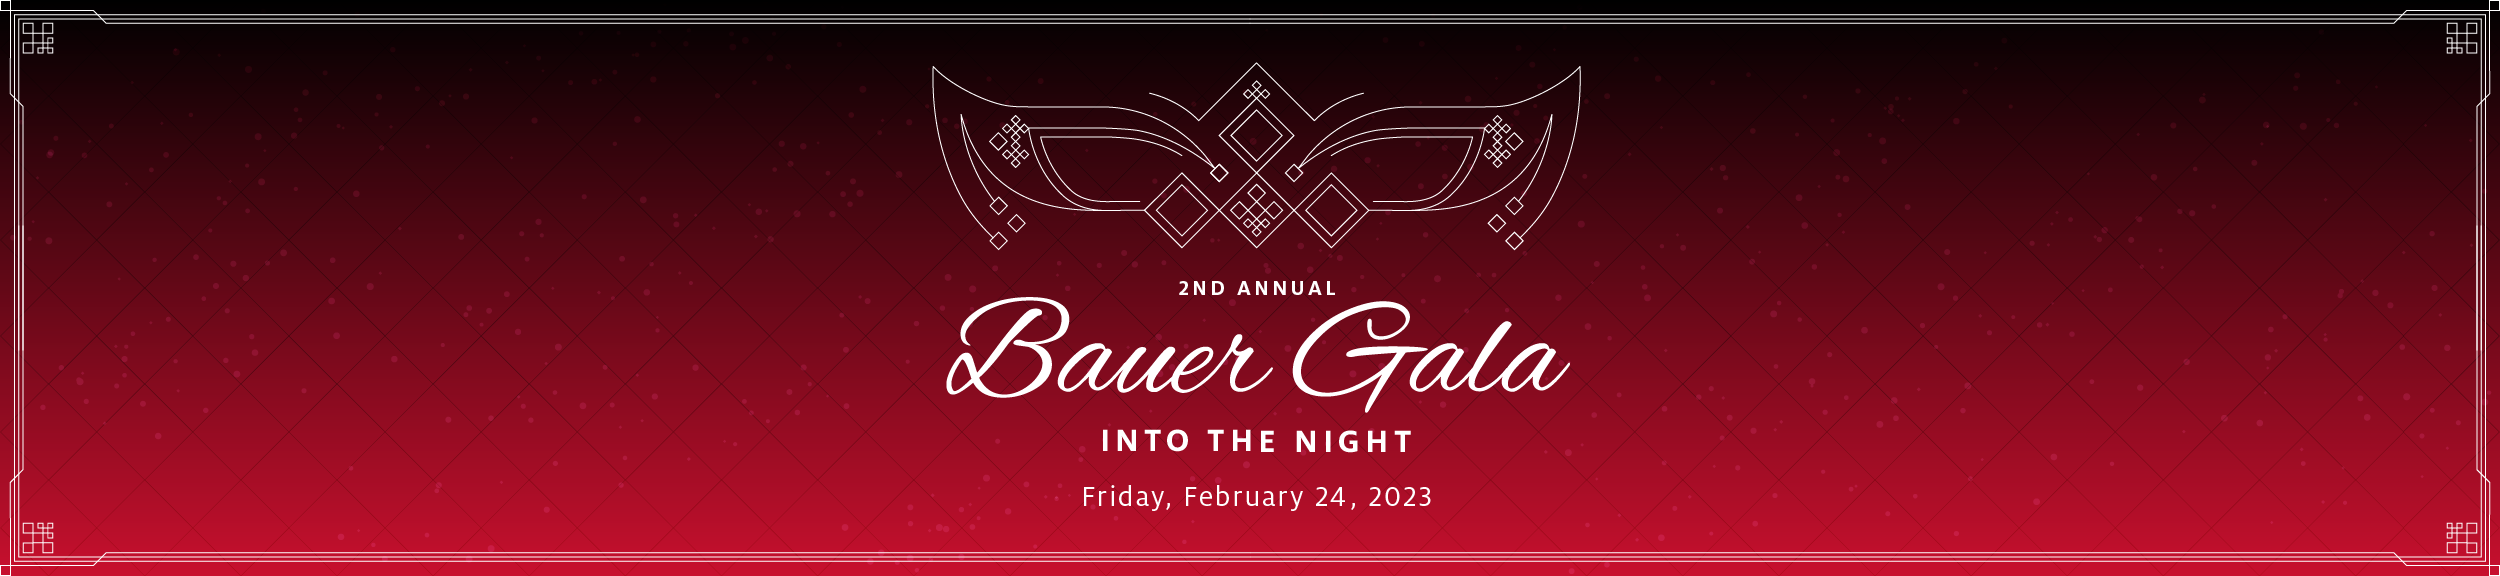 2nd Annual Bauer Gala: Into the Night: Feb. 24, 2023